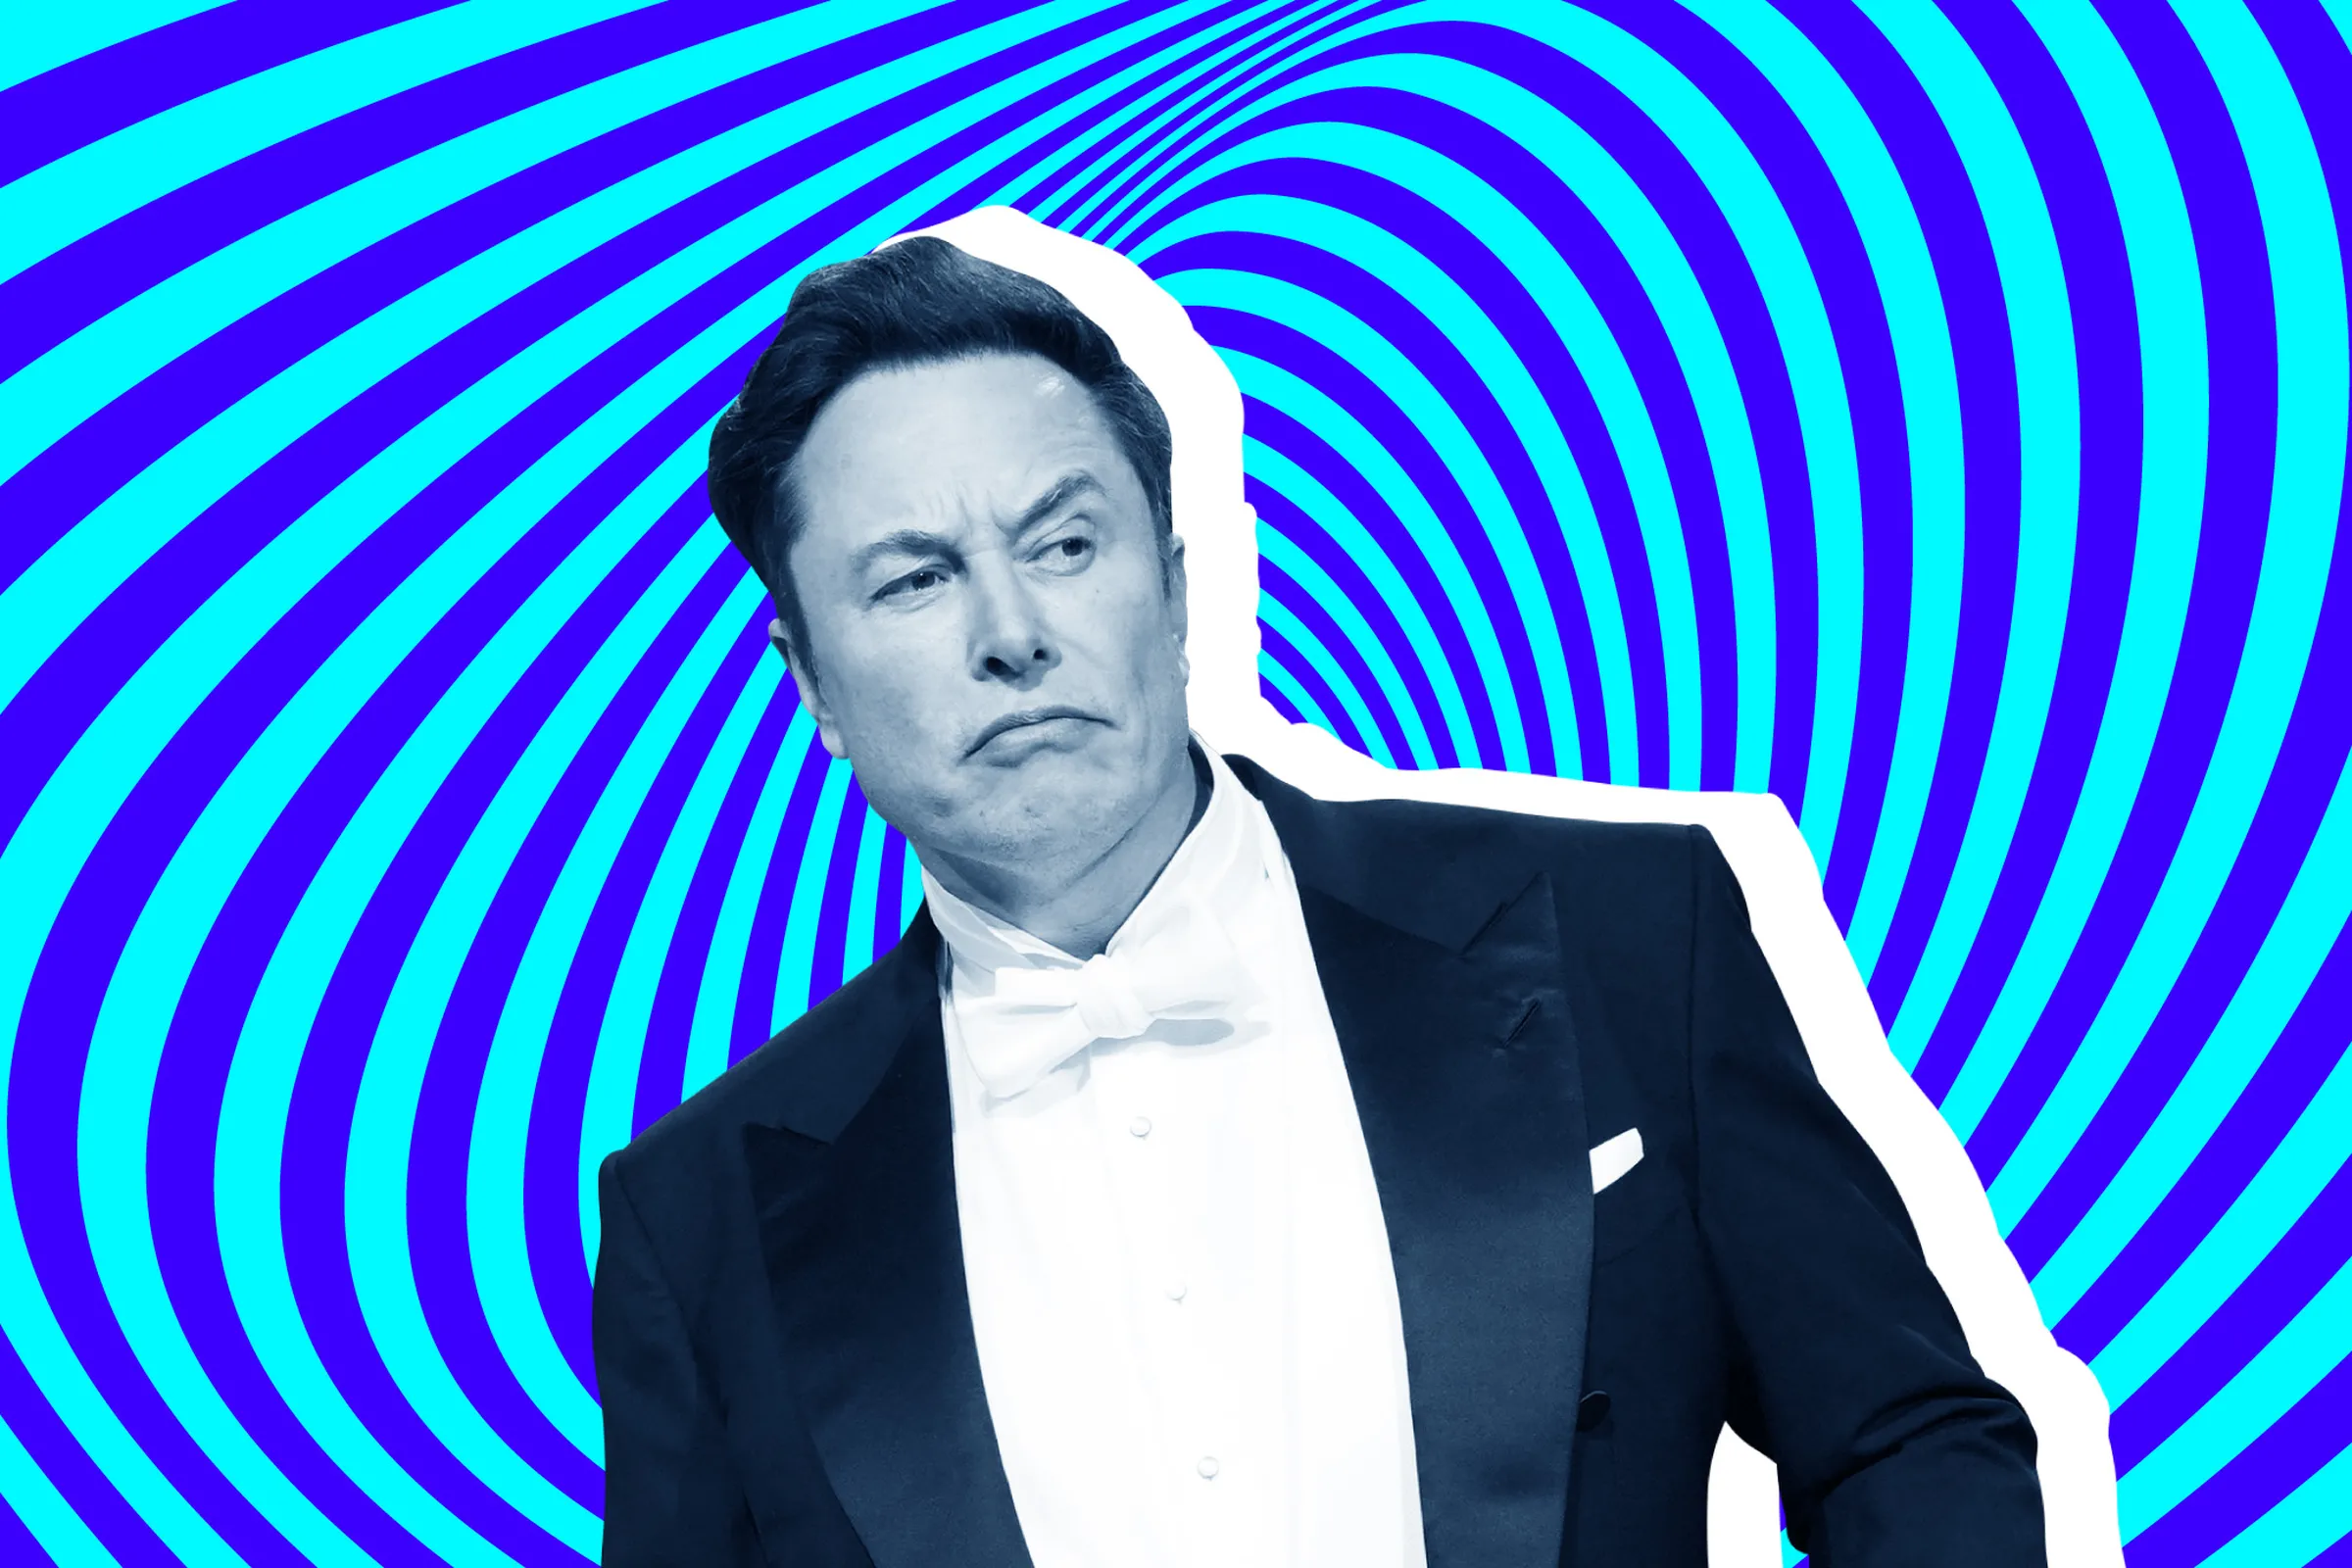 11 Lesser-Known Facts About Elon Musk That Will Surprise You​